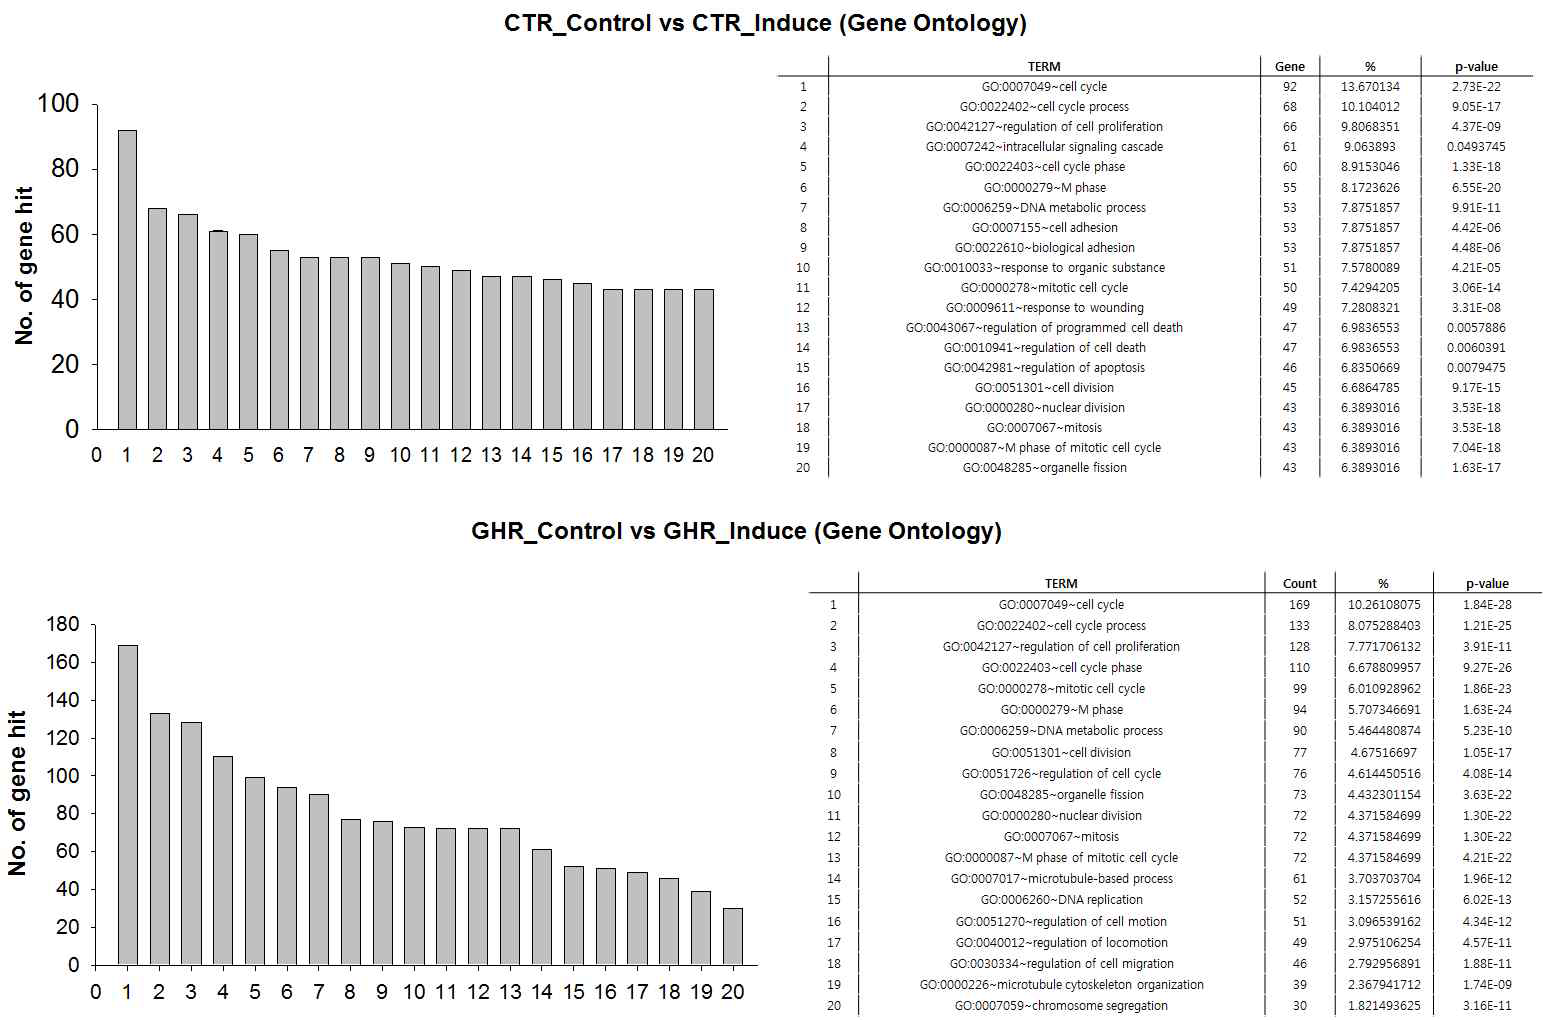 Gene Ontology (GO) biological process analysis of genes GO functional annotation clustering was performed using DAVID Bioinformatics Resources